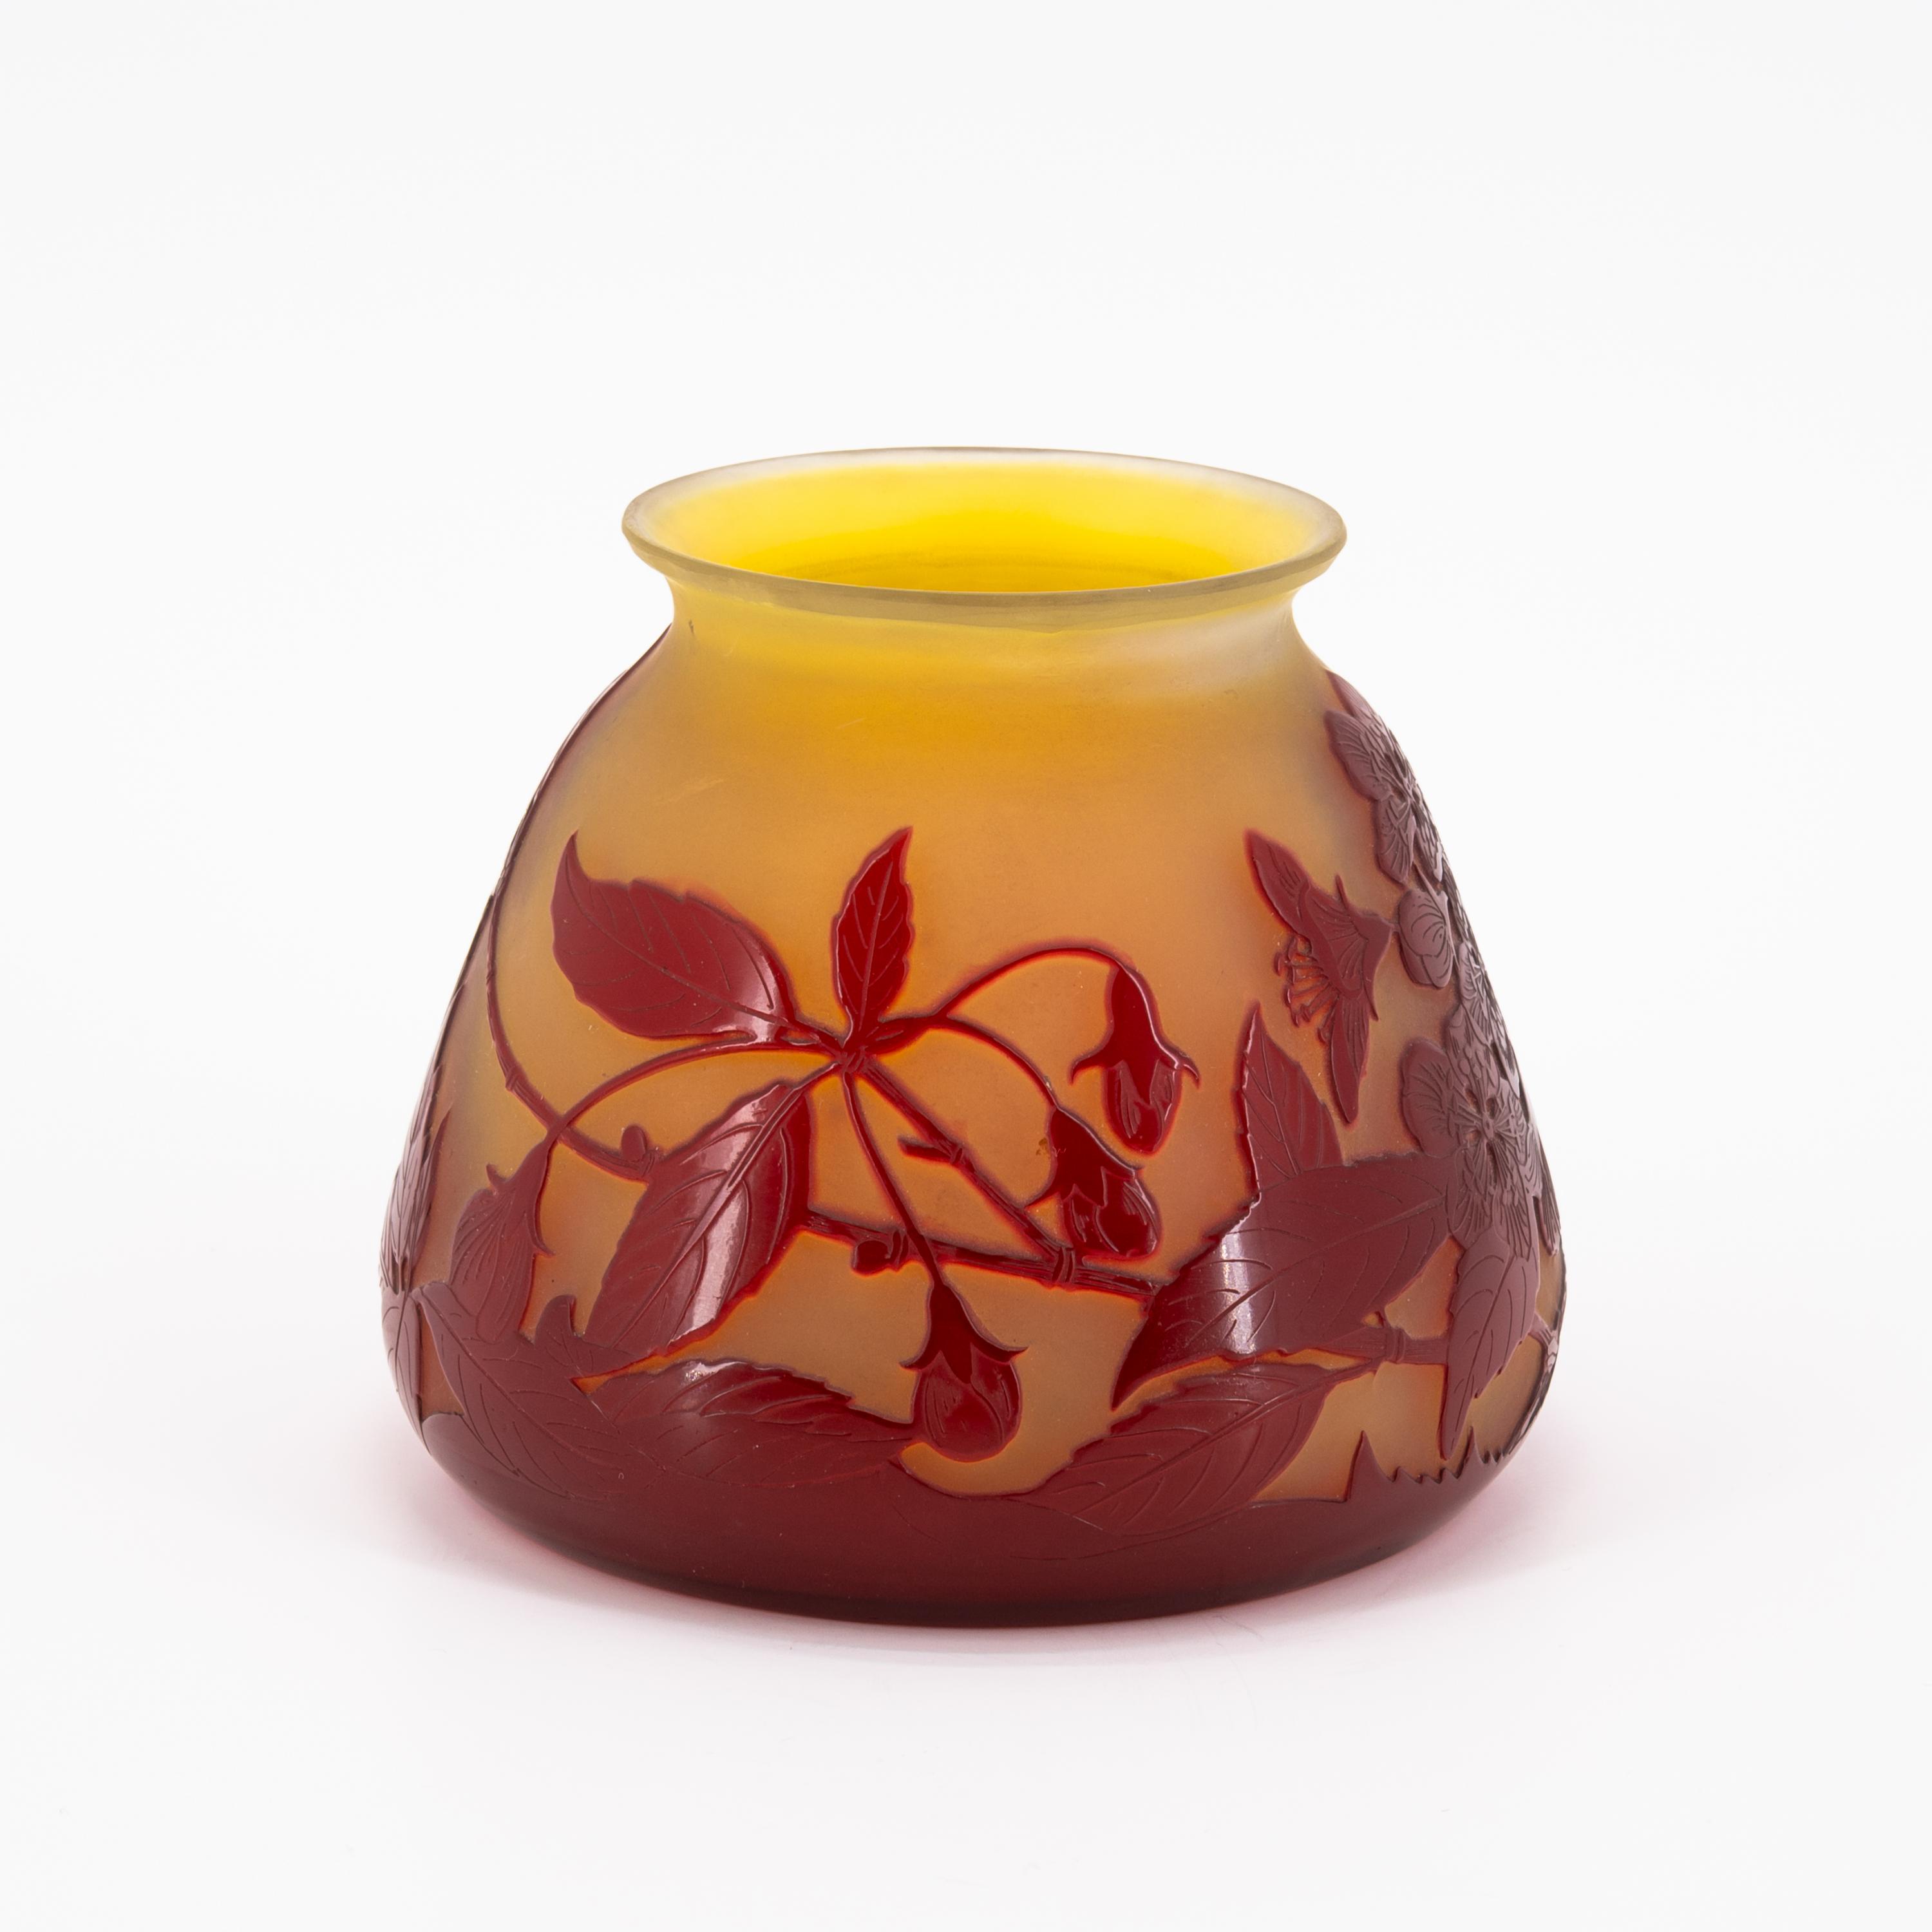 SMALL BULBOUS GLASS VASE WITH CHARRY BLOSSOM DECOR - Image 4 of 6